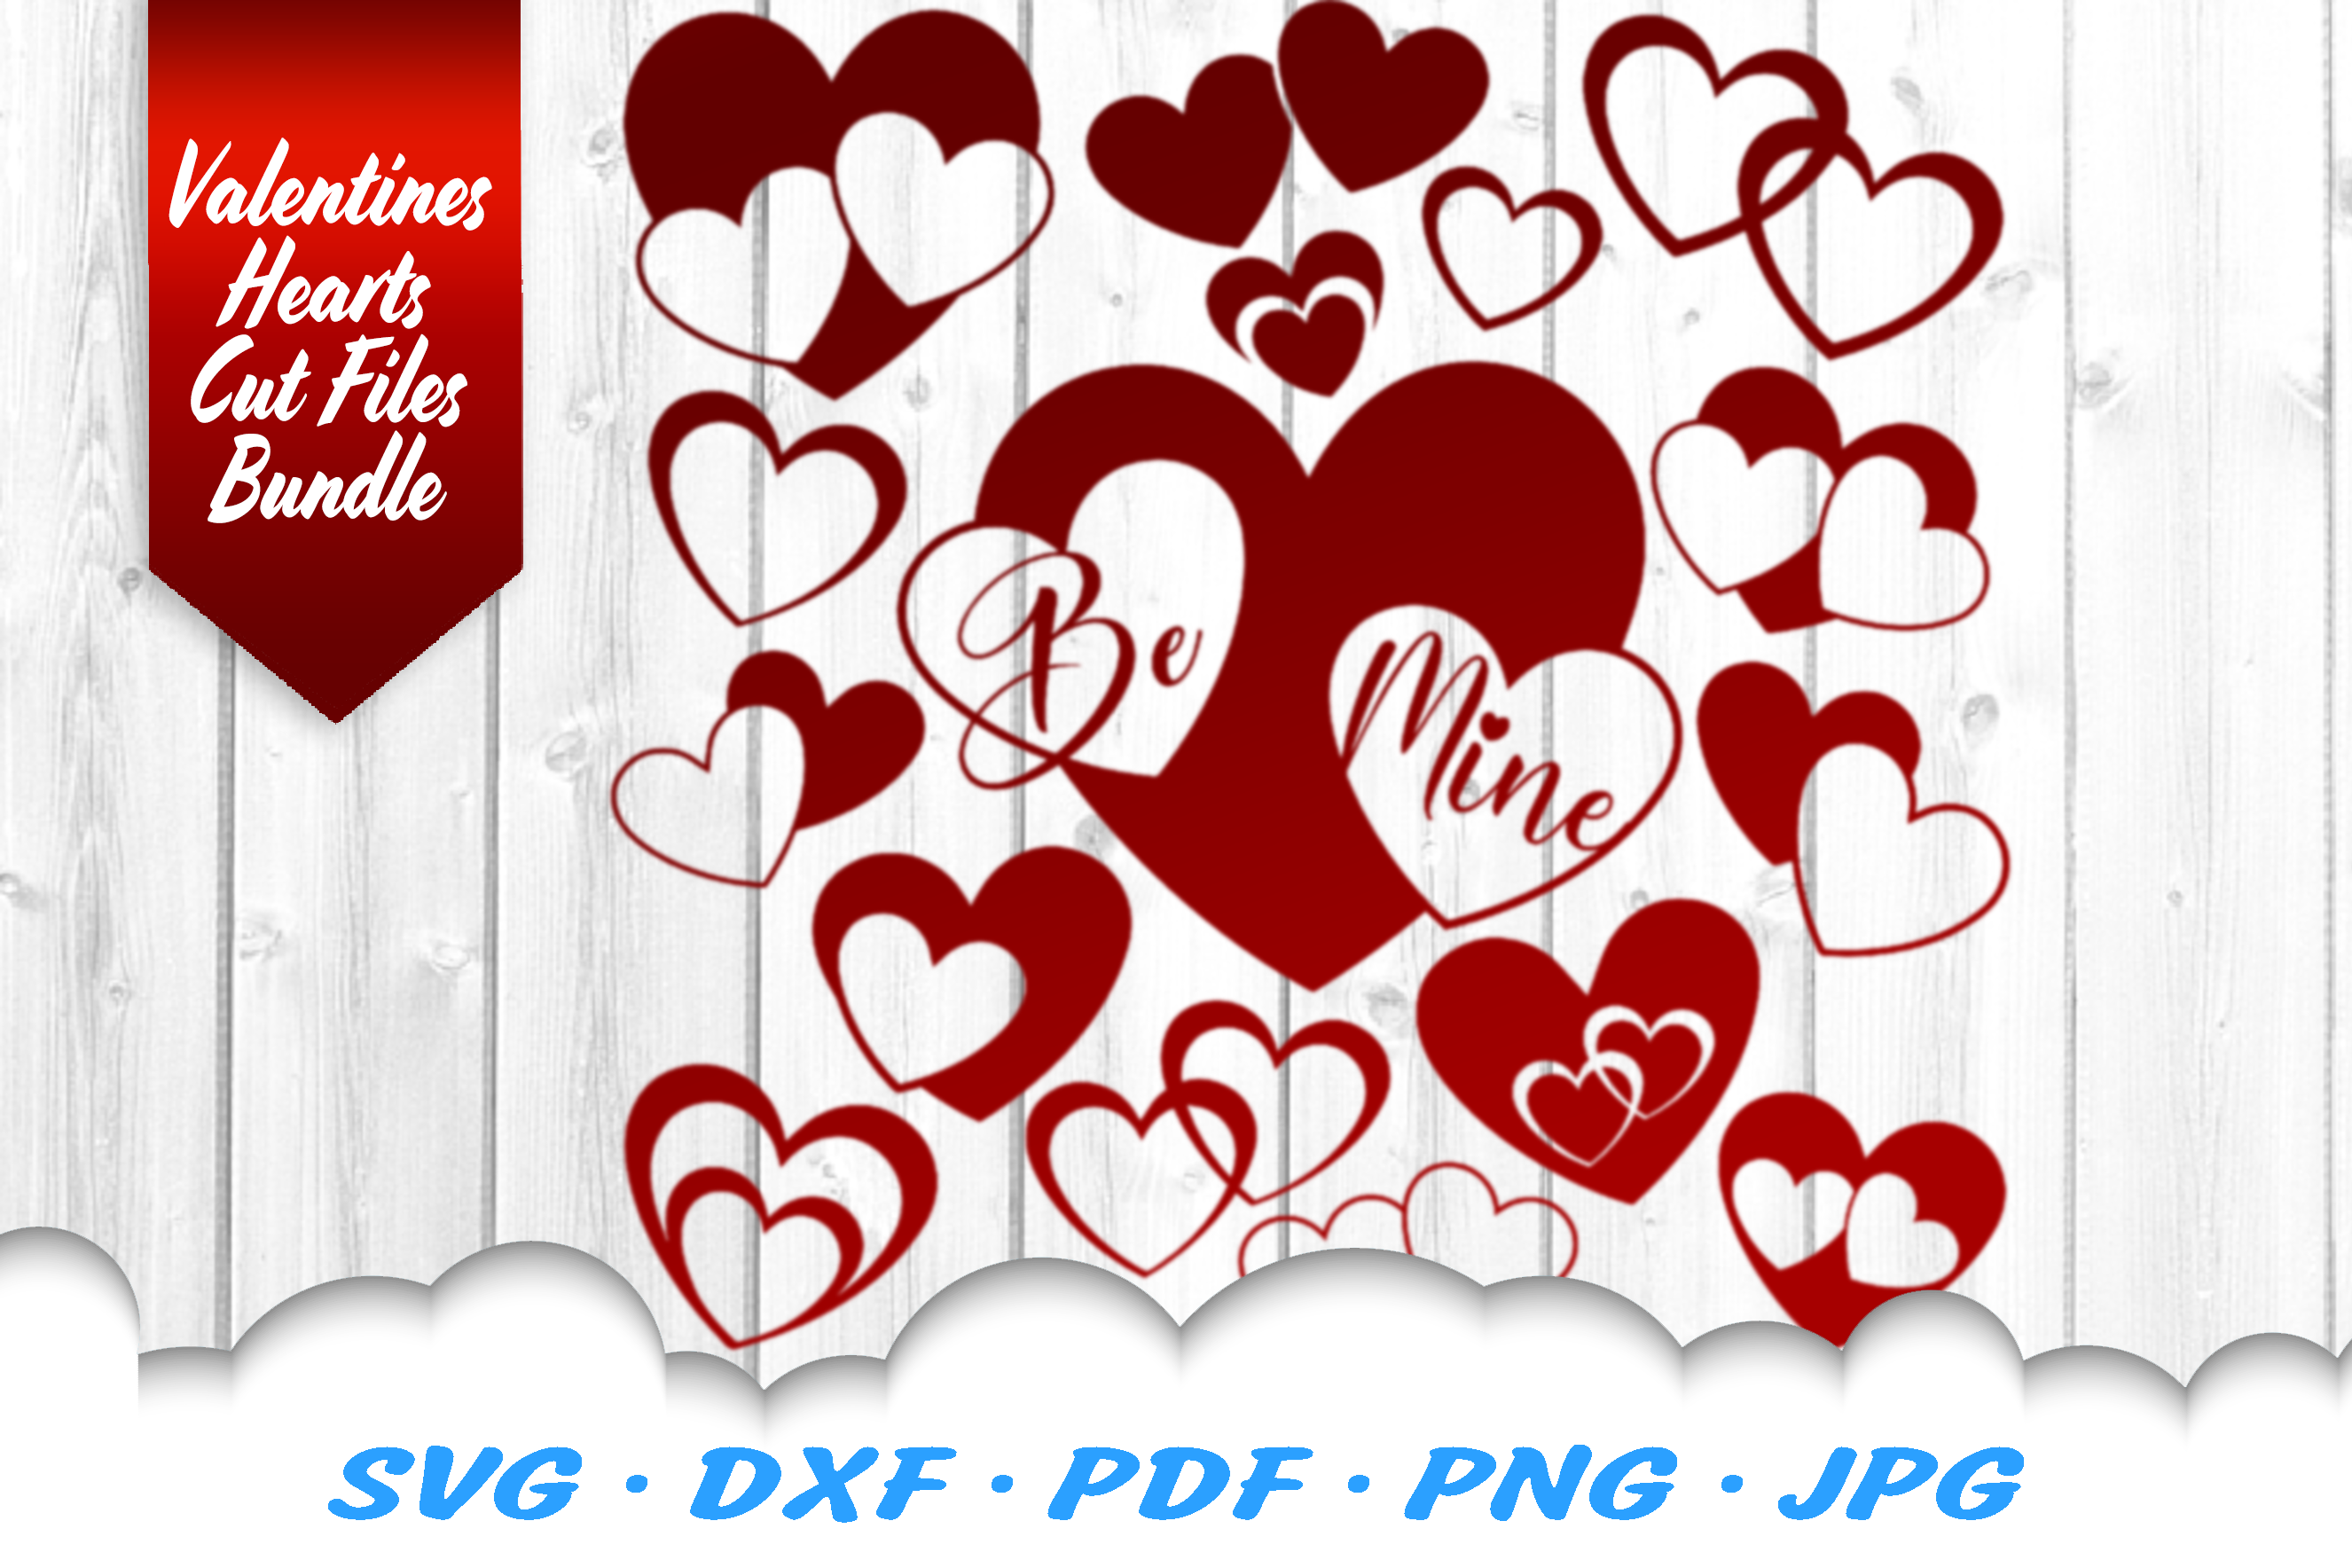 Download Valentines Day Hearts SVG DXF Cut Files Bundle